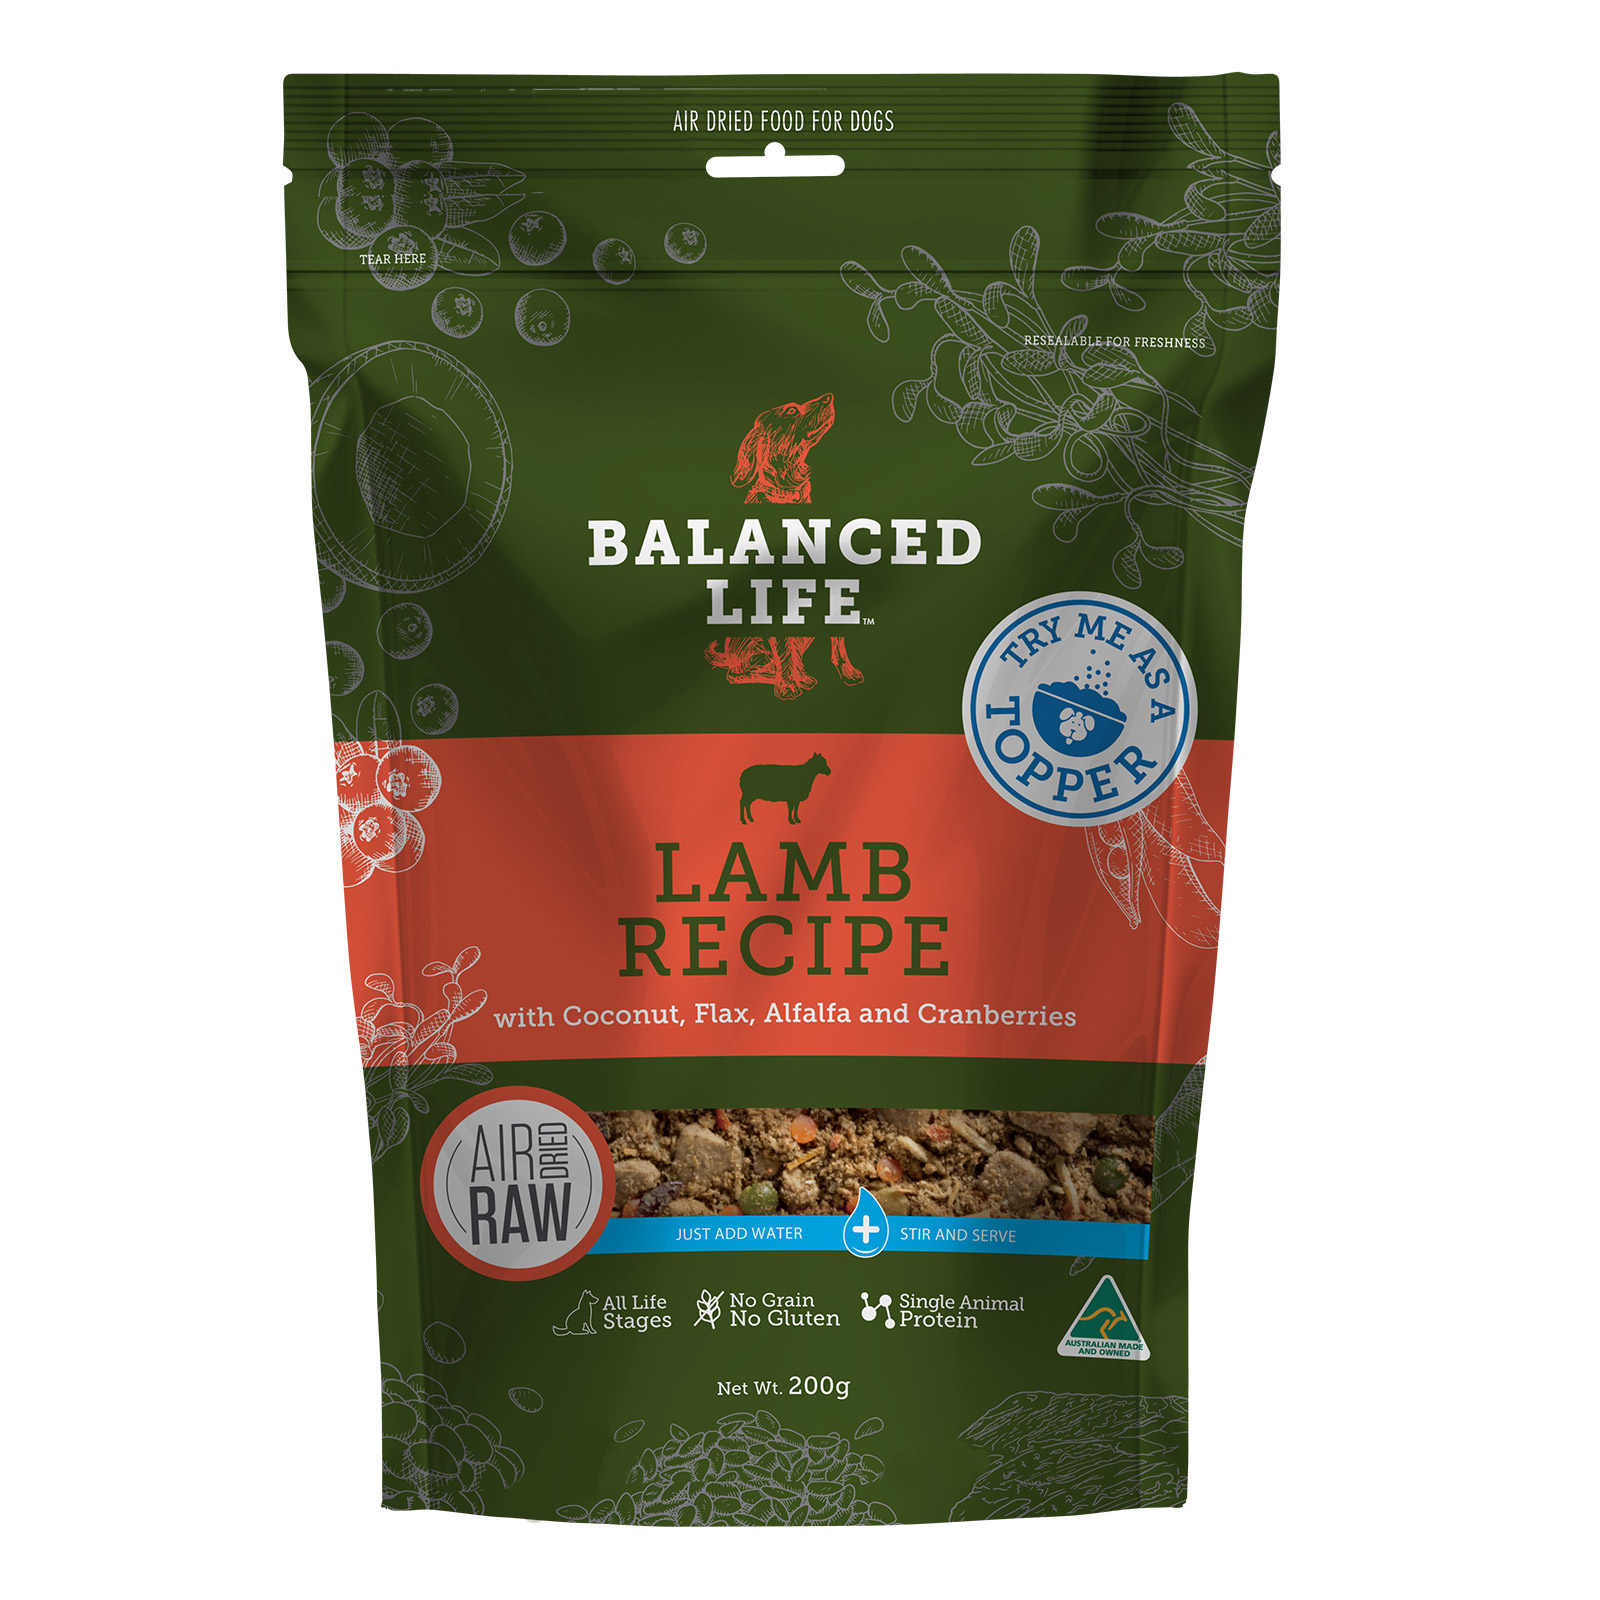 Balanced Life Rehydrate Lamb Recipe Natural Air Dried Meat Dog Food for Dogs